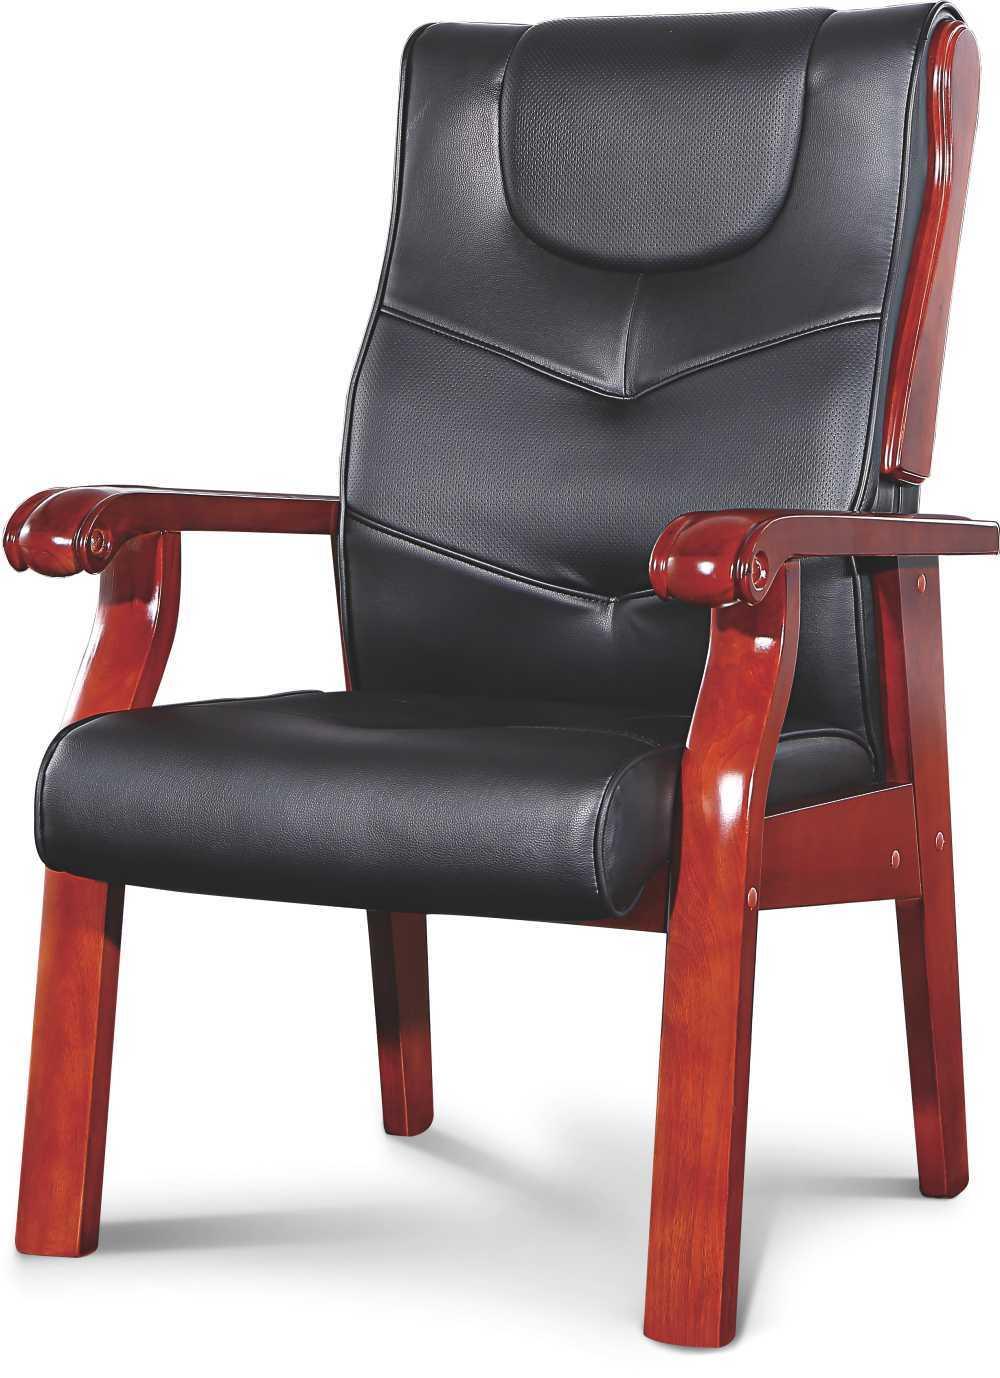 Conference Boardroom Visitor Office PU Leather Chair with Wooden Armrest and Legs